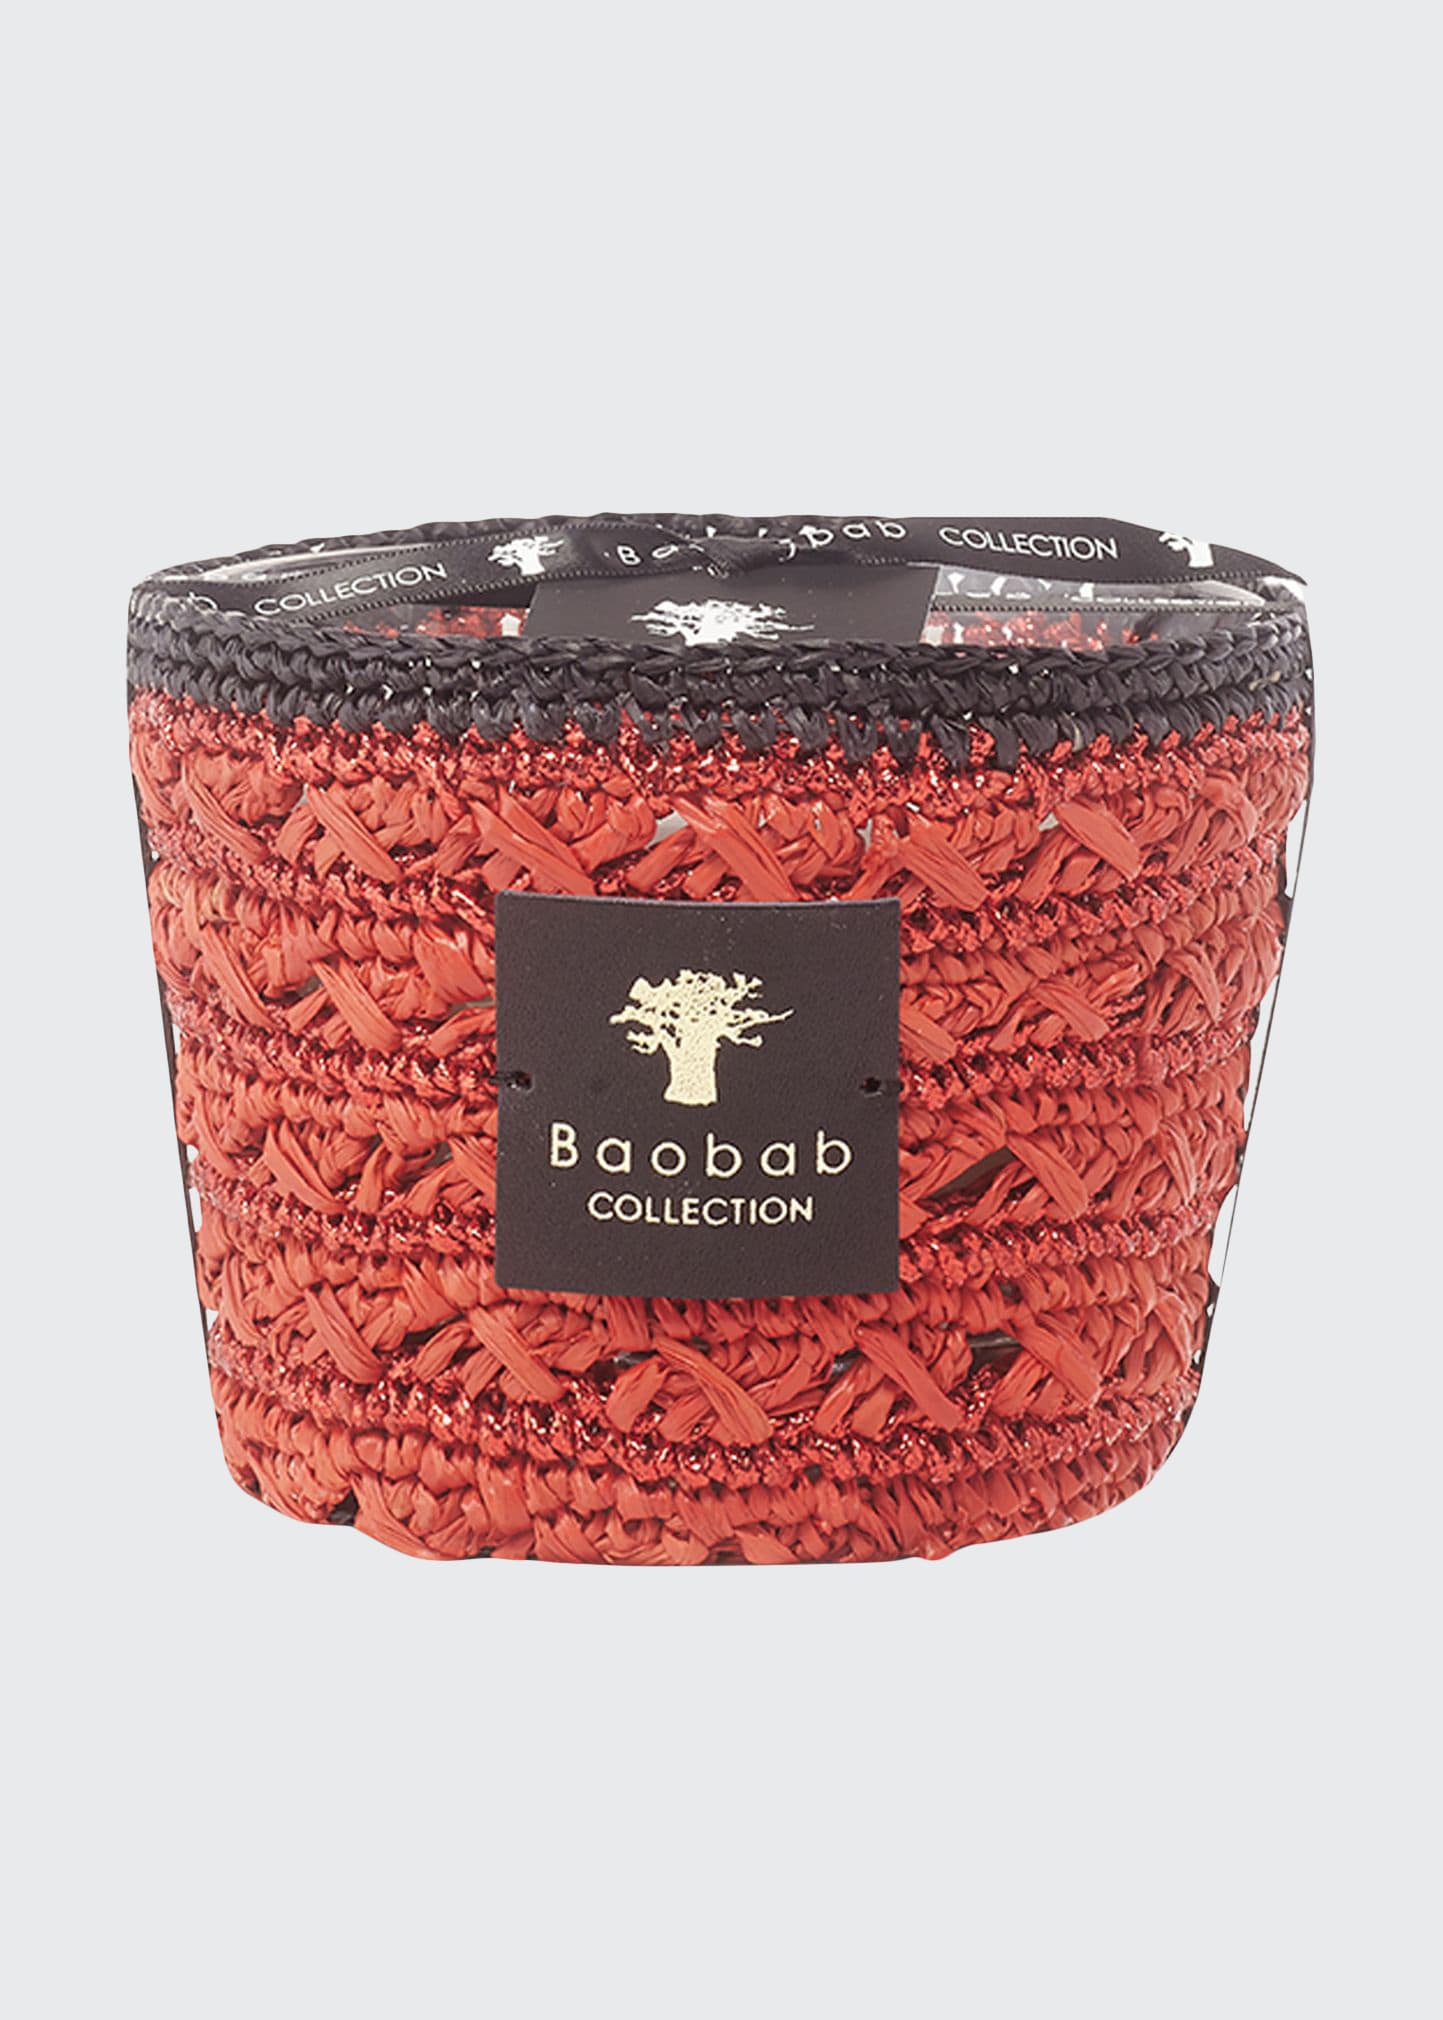 Baobab Collection Max 10 Foty 4" Candle In Red